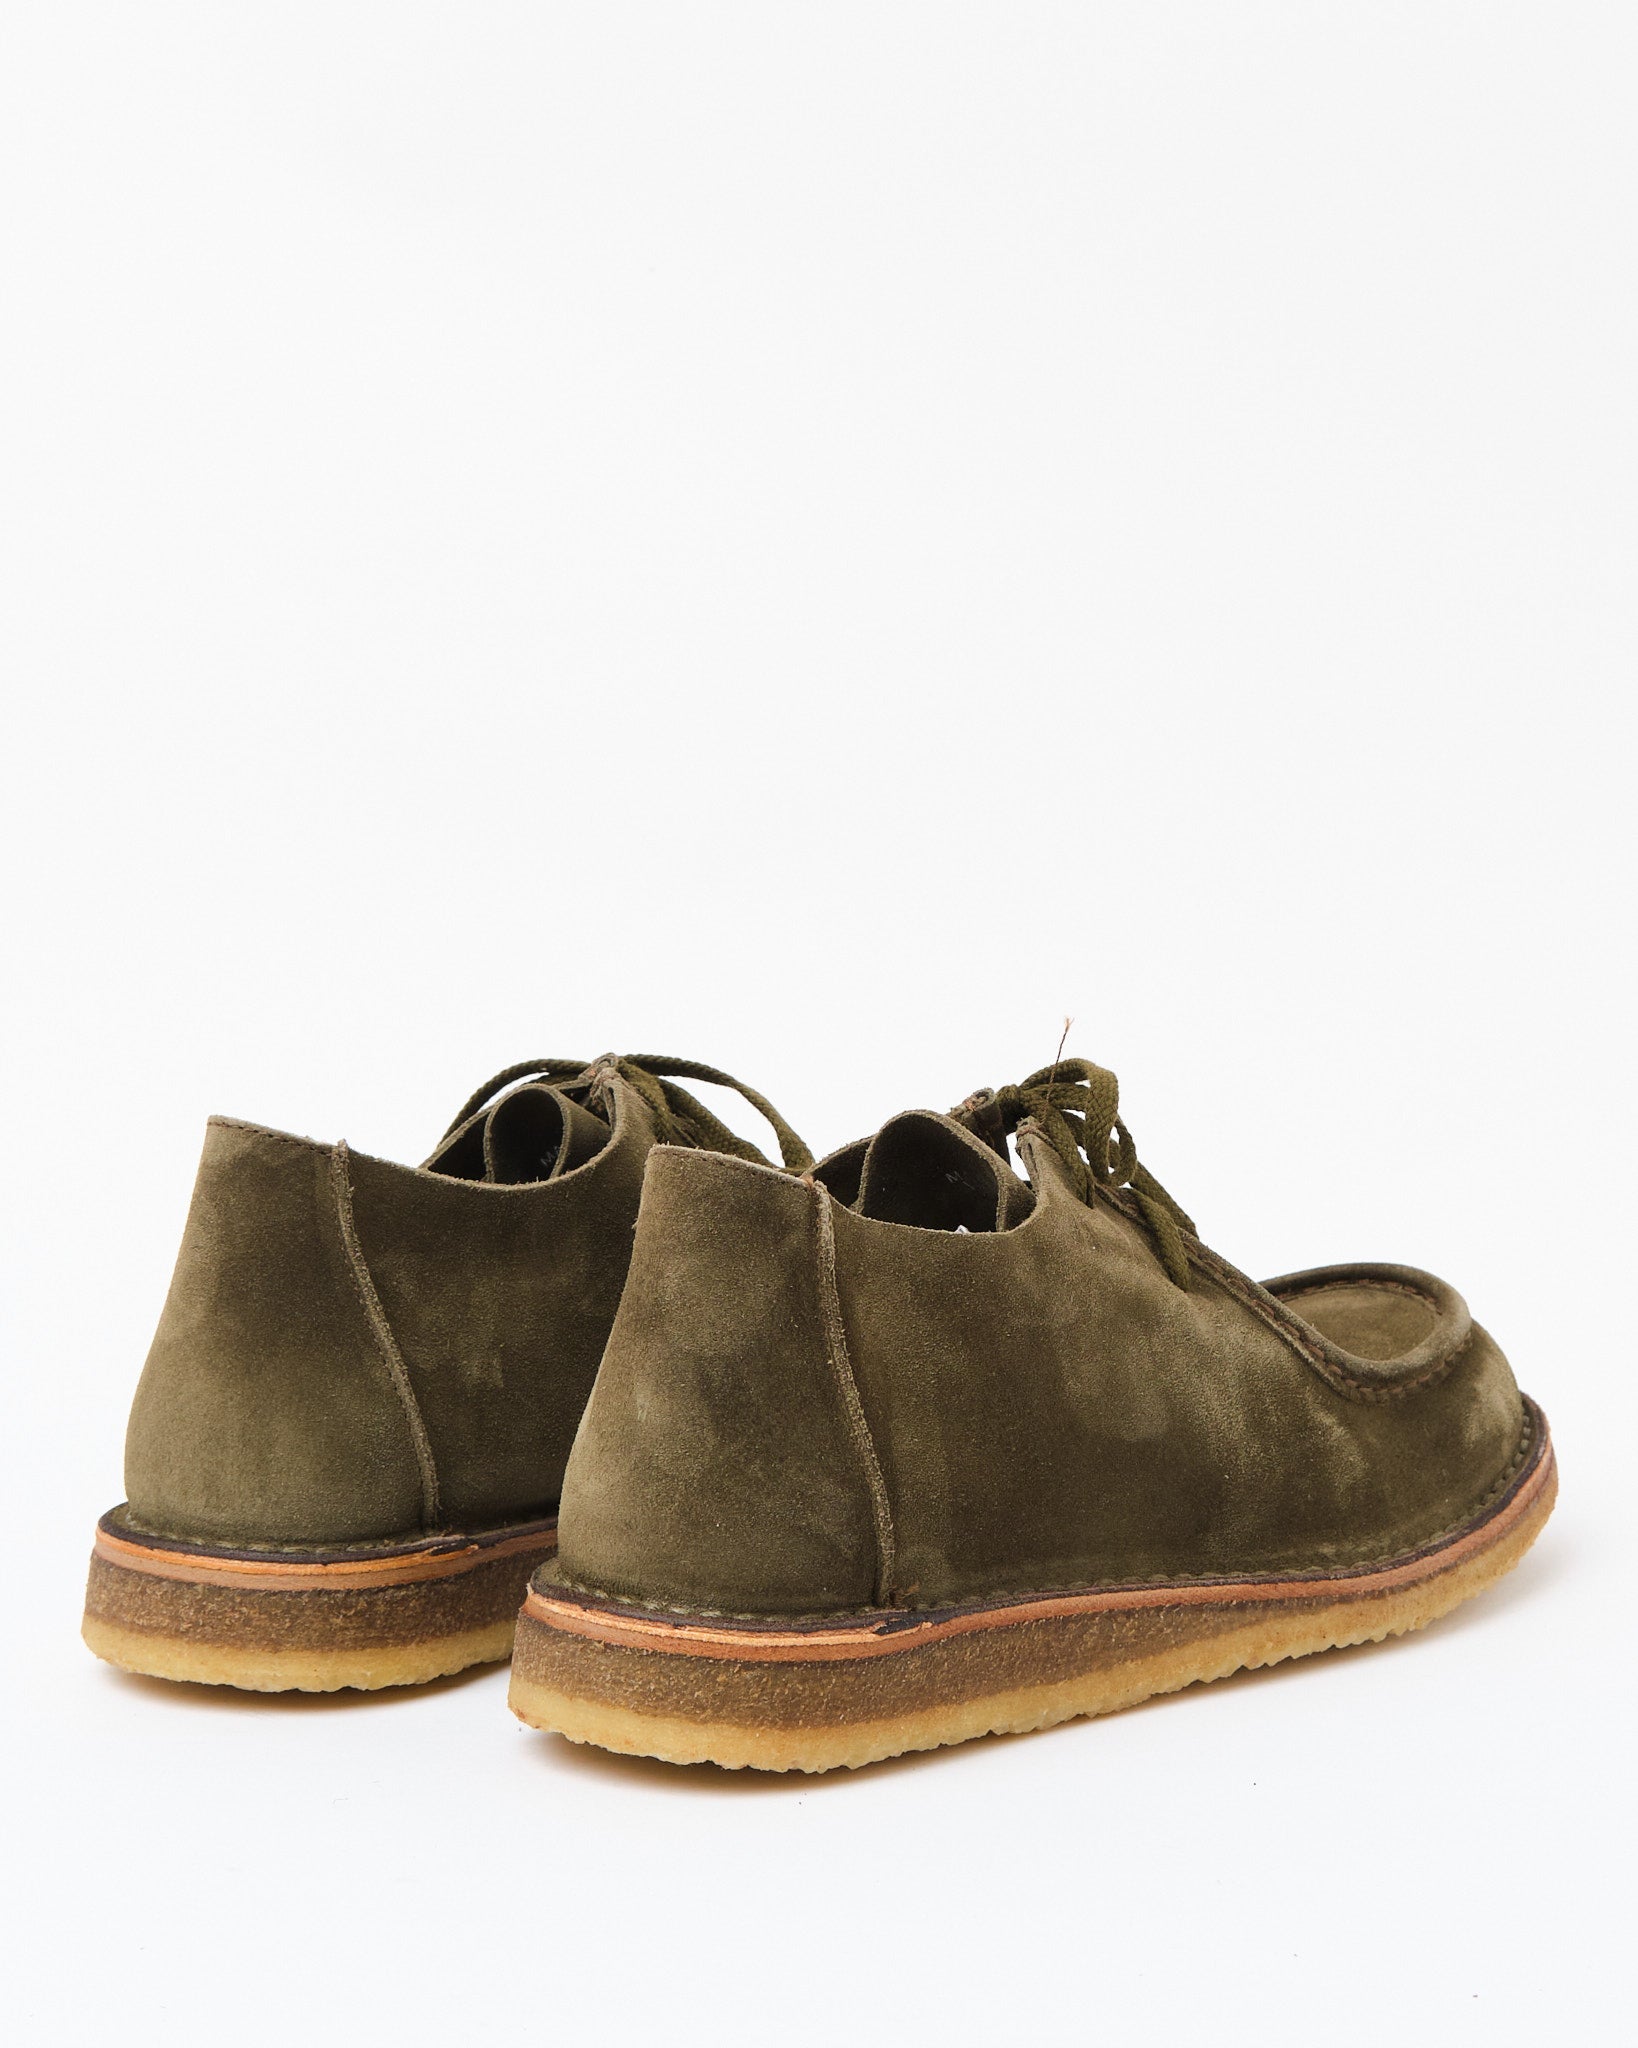 The Tuesday Steal: These Astorflex Chukka Boots are the Perfect Fall Chukka  Boots Right Now | The Style Guide